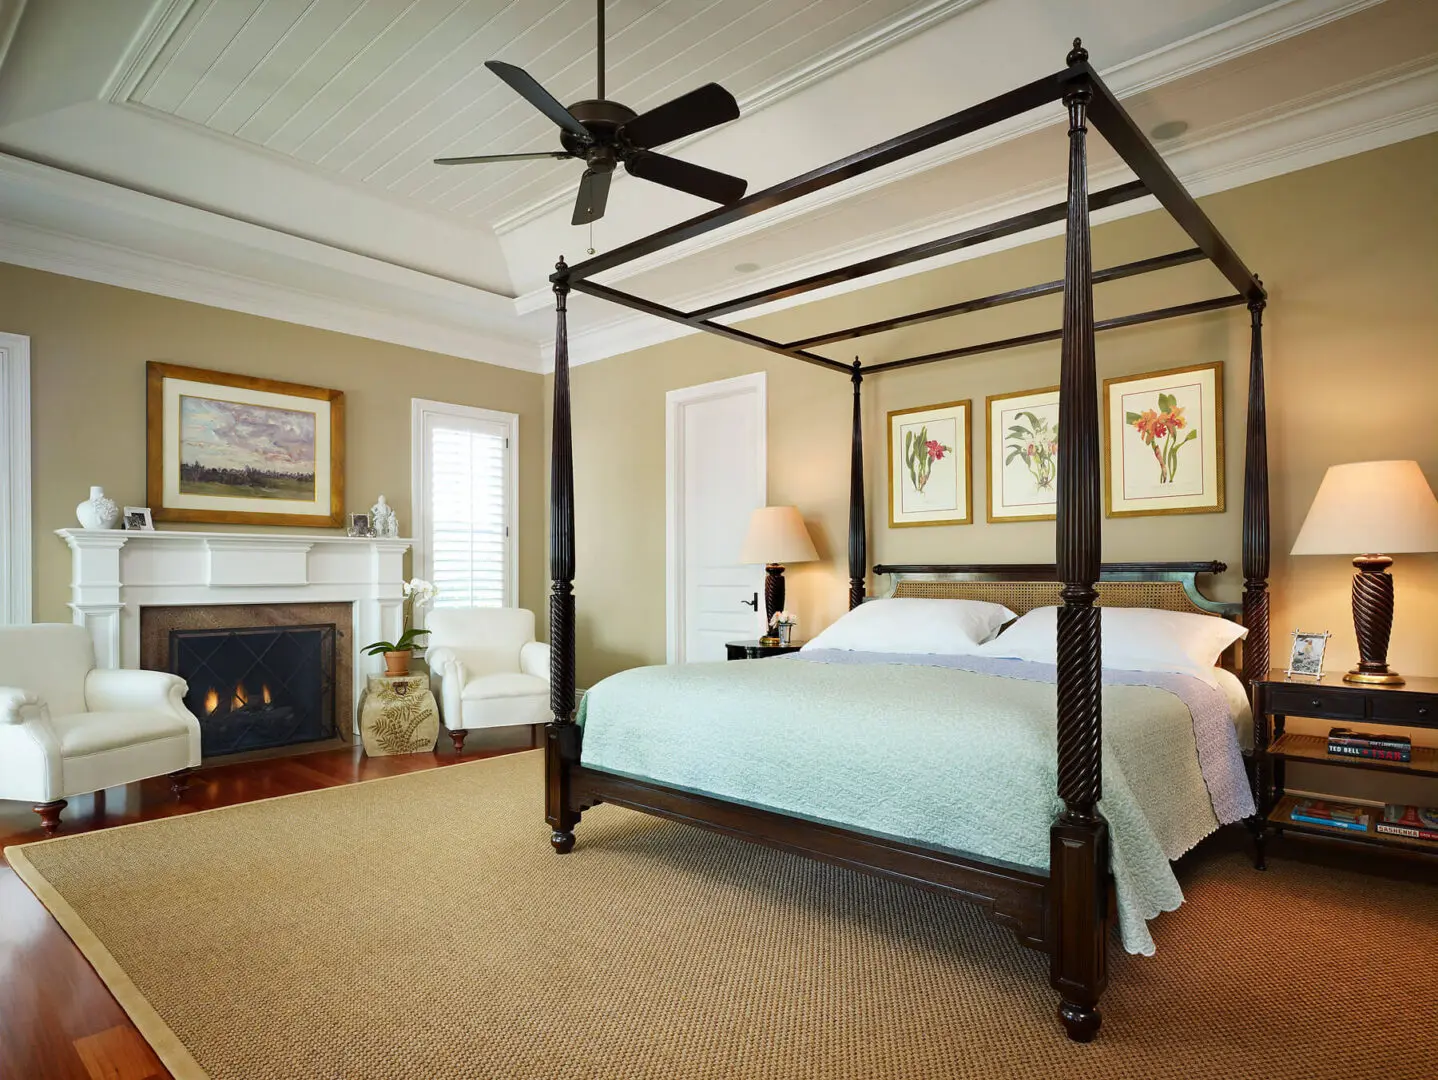 A bedroom with a bed, fireplace and ceiling fan.